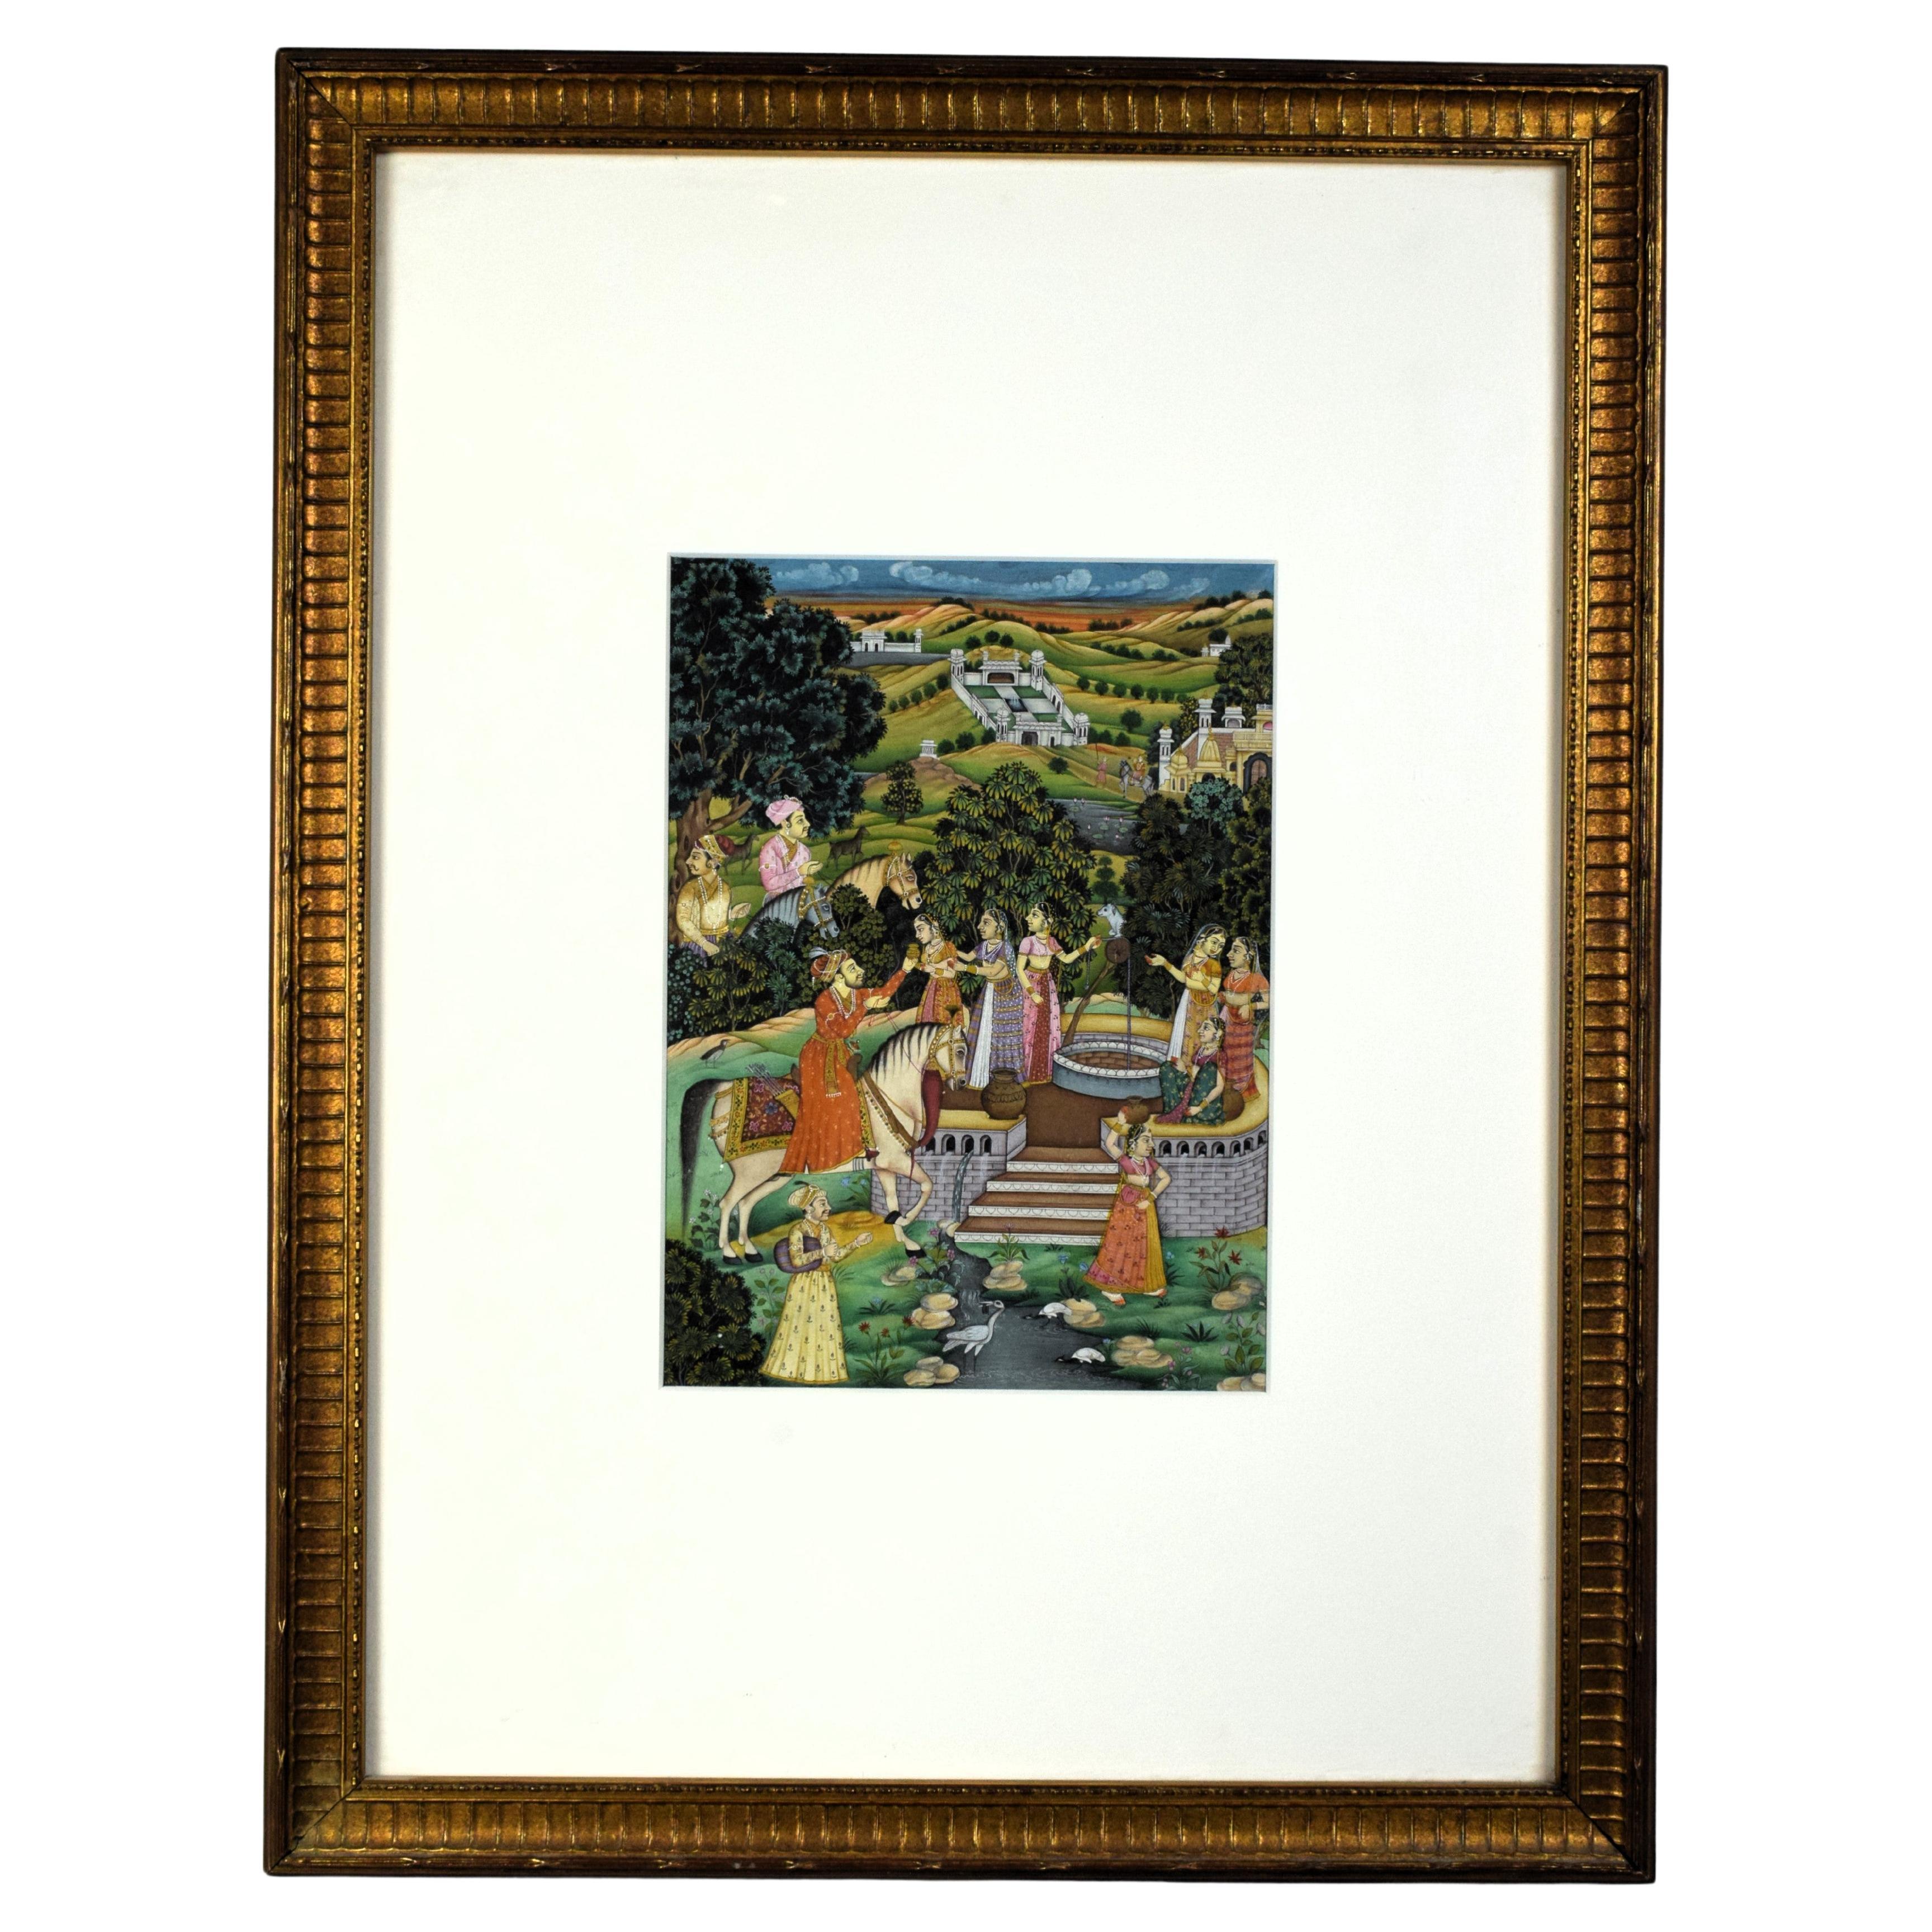 Which miniature painting is from Mughal school?